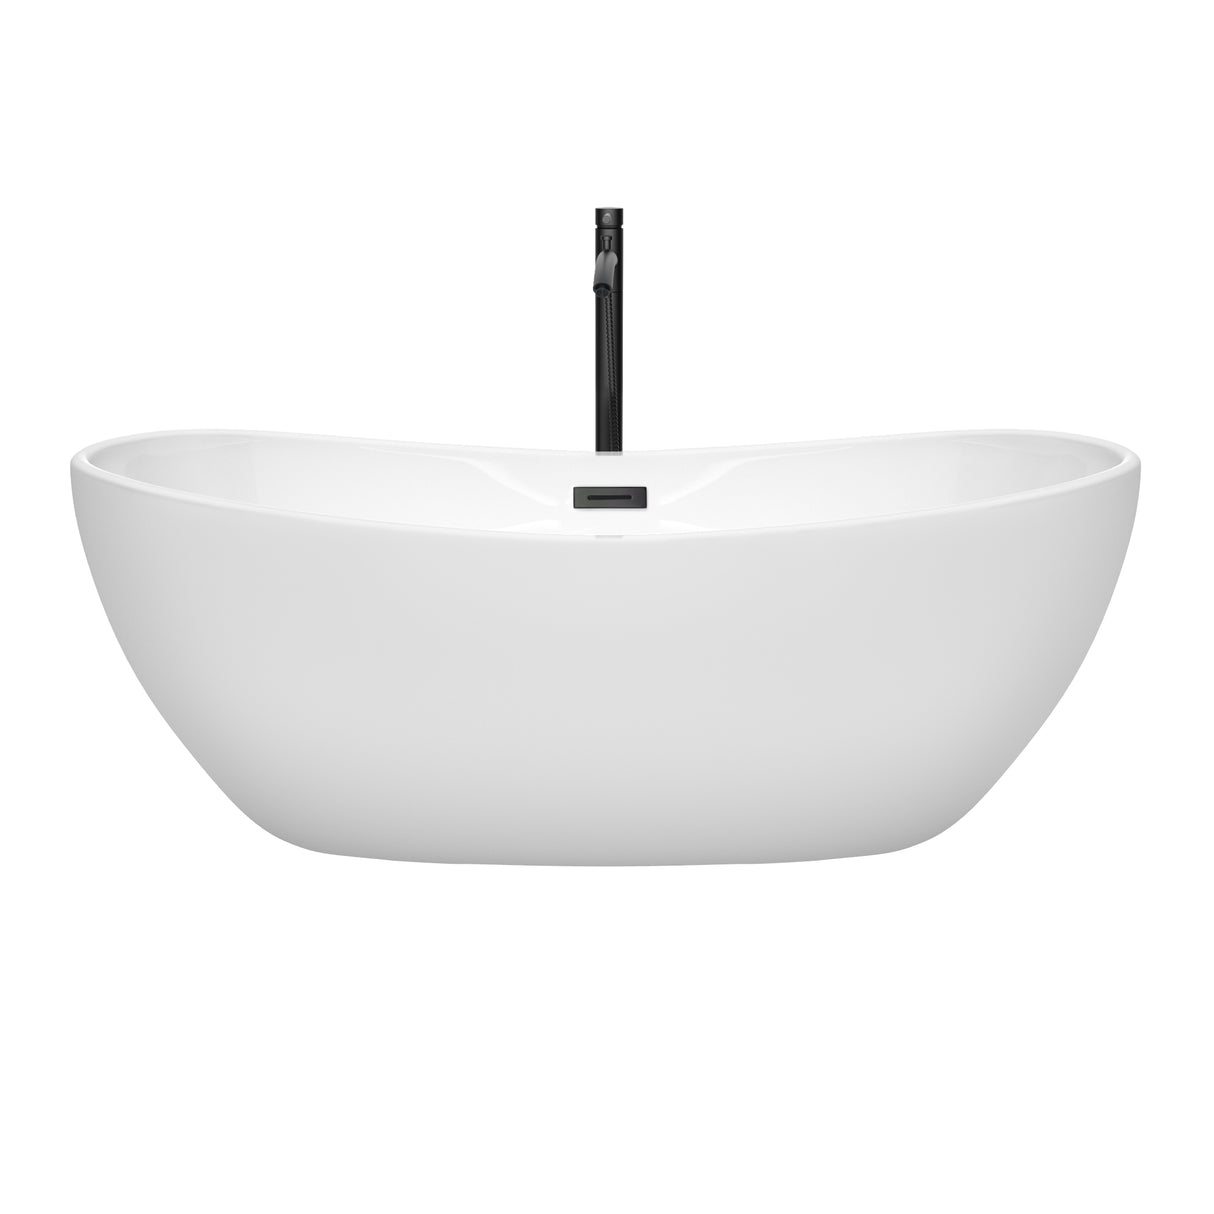 Rebecca 65 Inch Freestanding Bathtub in White with Floor Mounted Faucet Drain and Overflow Trim in Matte Black